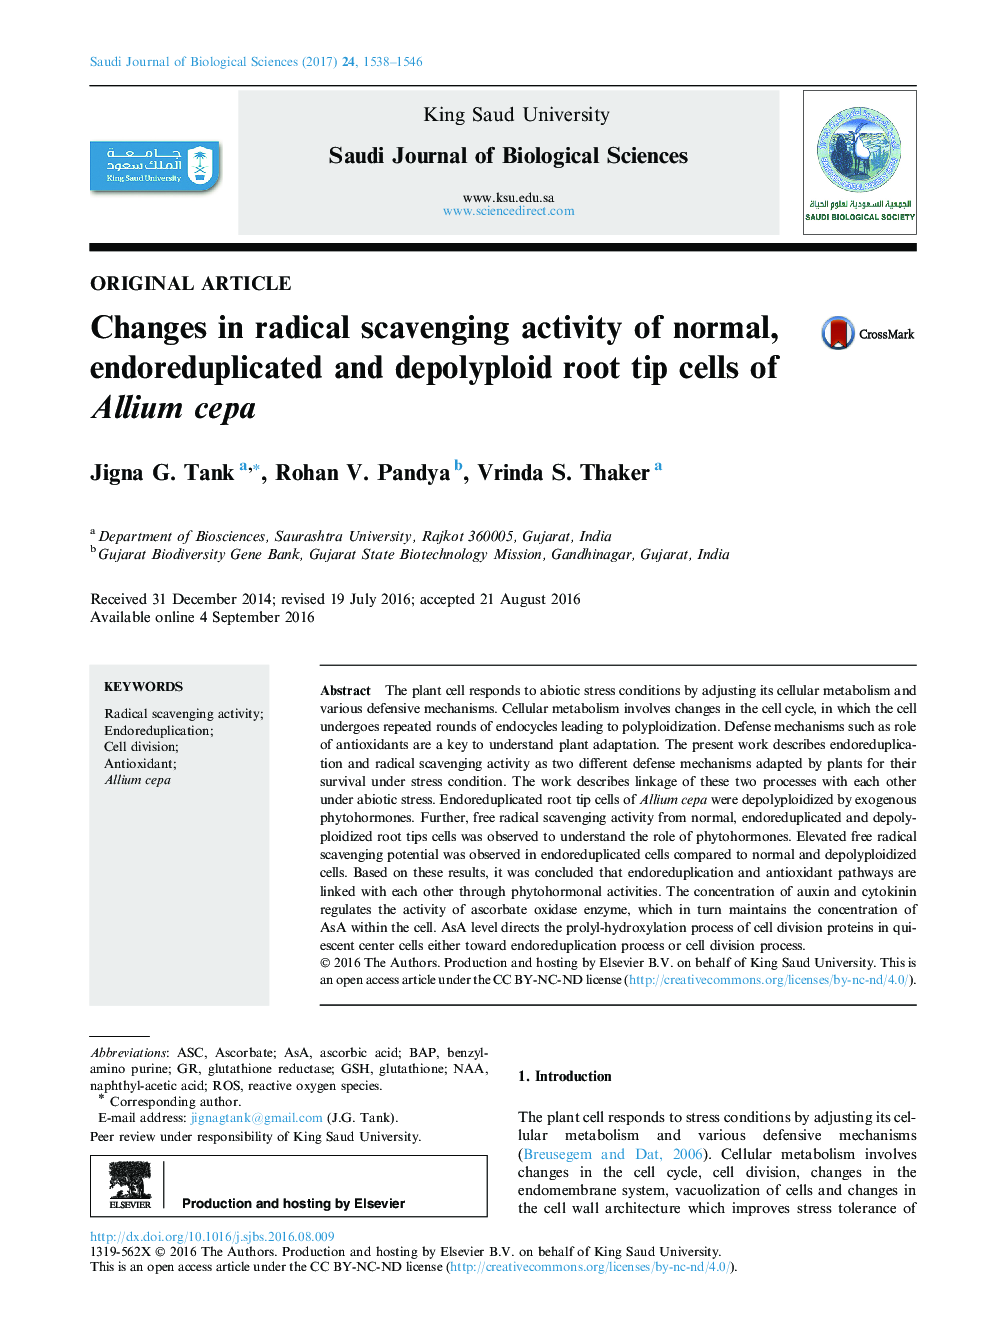 Original articleChanges in radical scavenging activity of normal, endoreduplicated and depolyploid root tip cells of Allium cepa